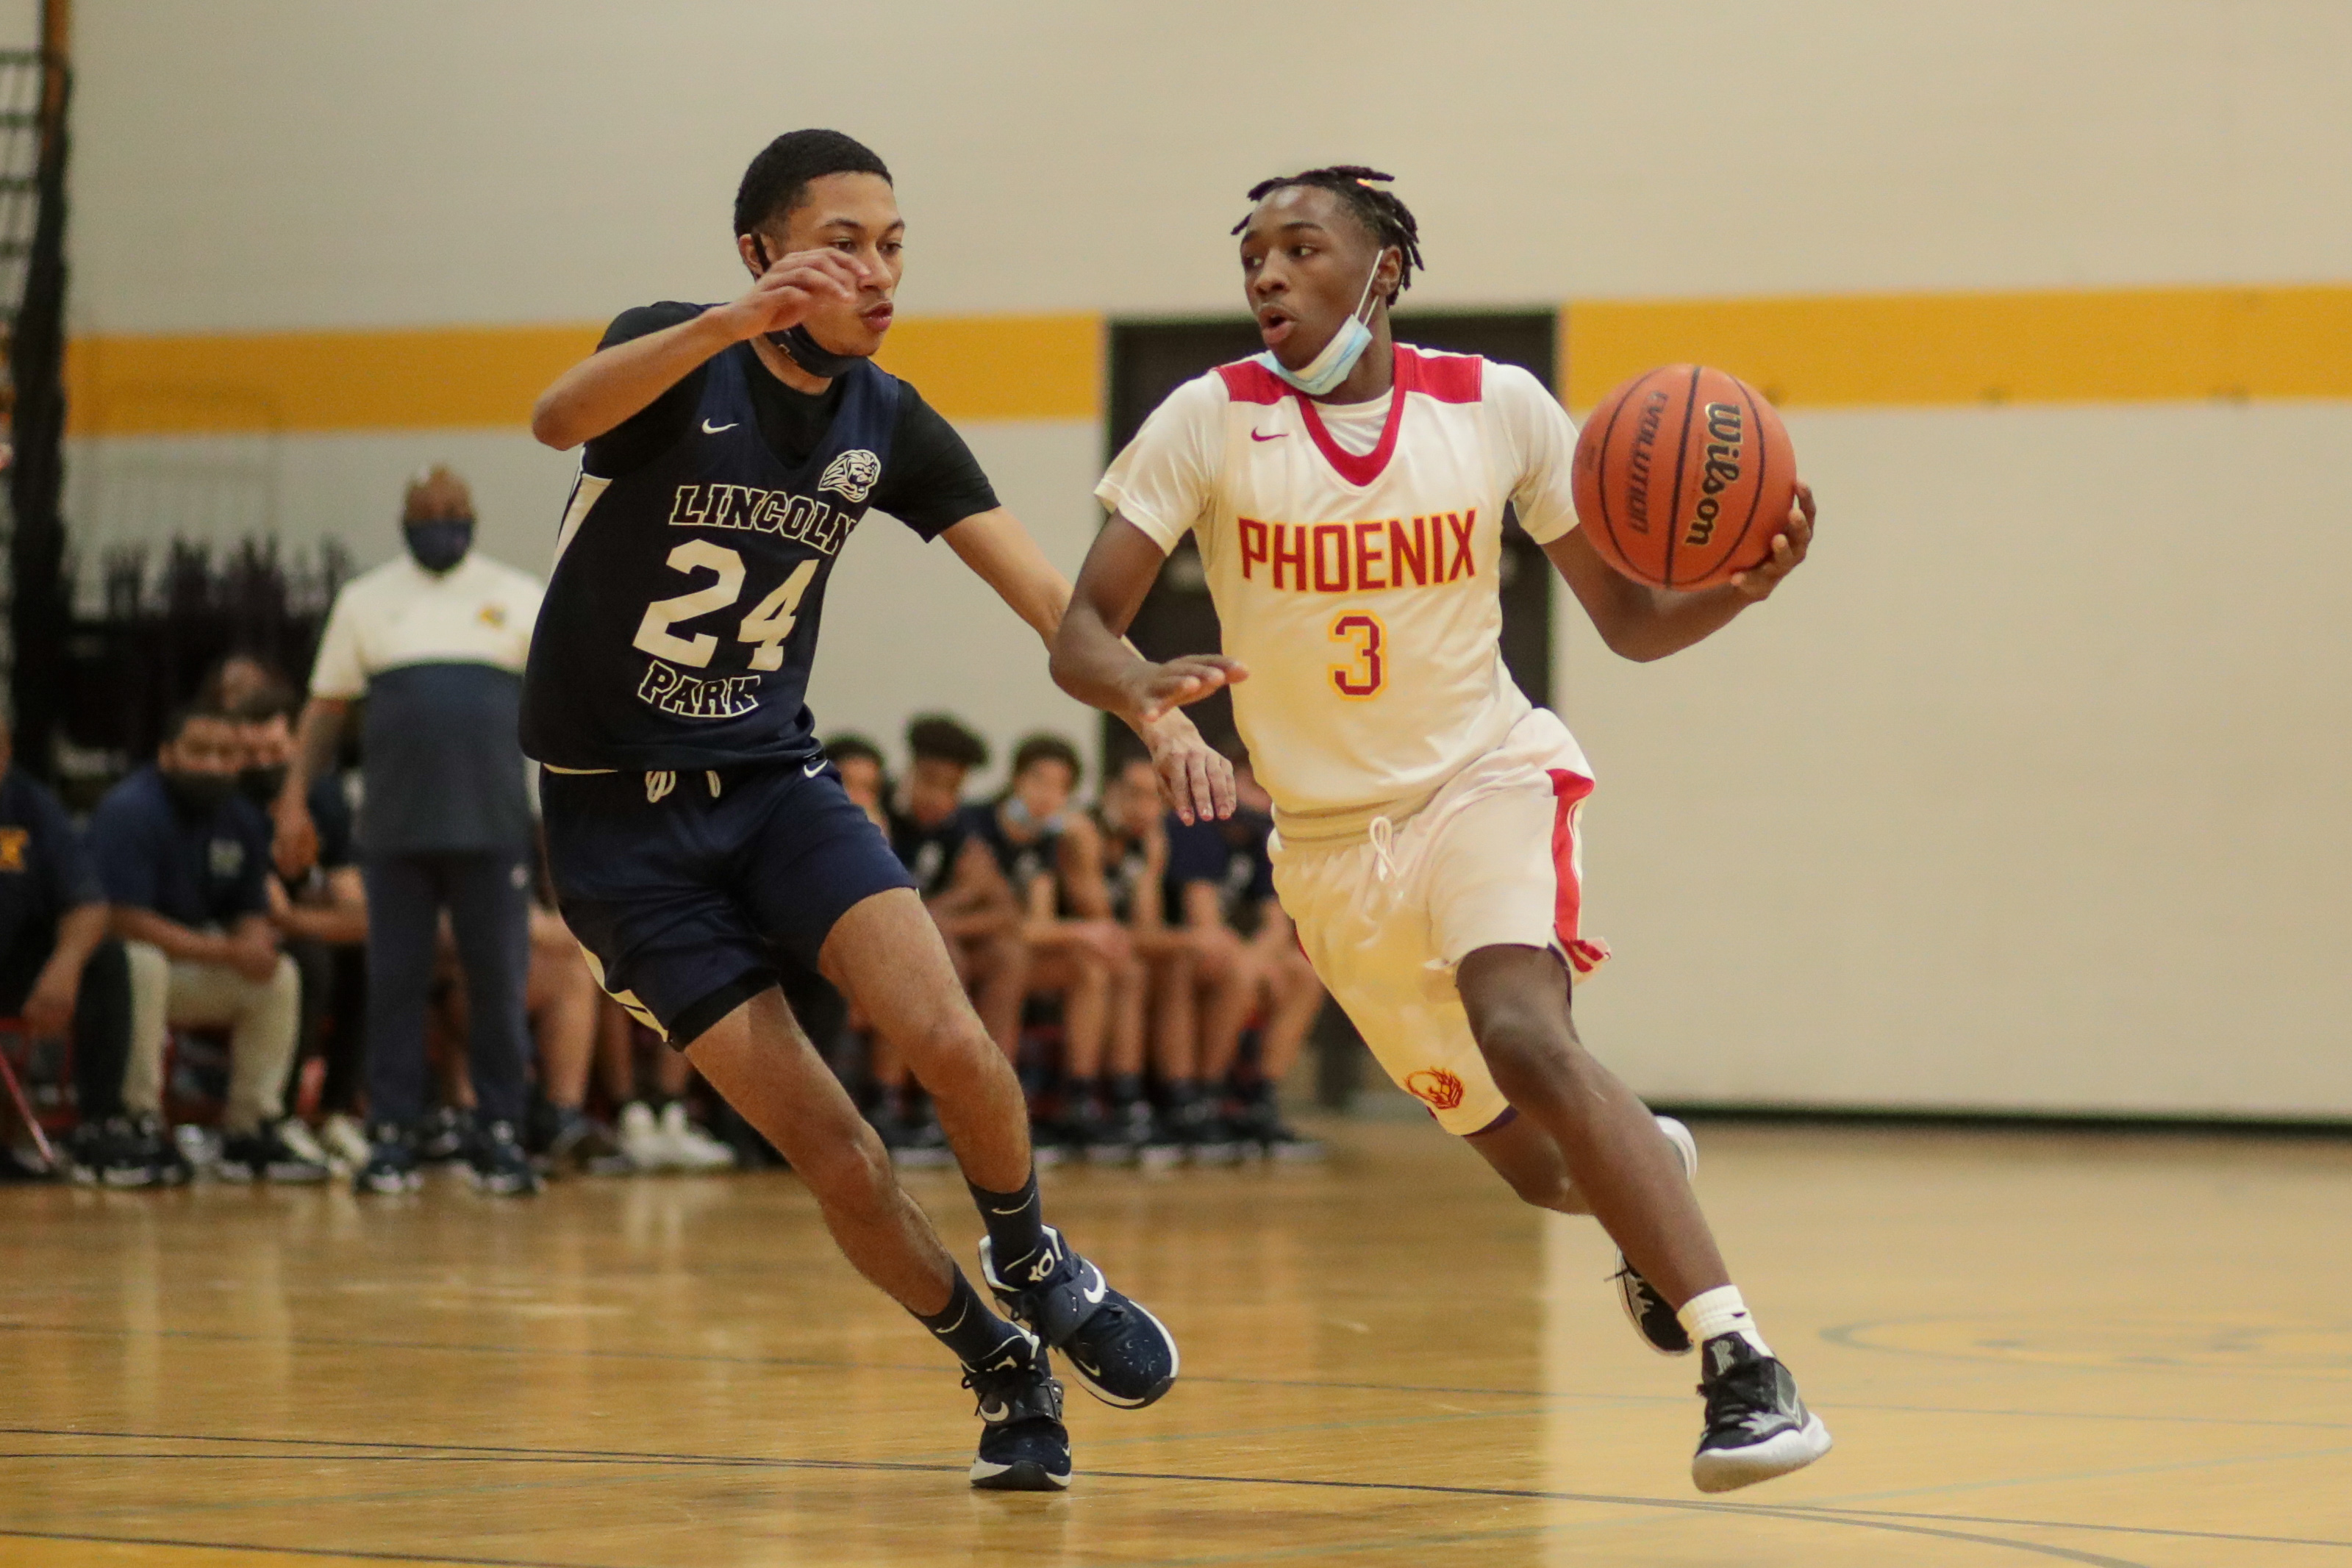 North Lawndale’s Jemarje Windfield (3) drives the ball past Lincoln Park’s Chris Hammonds (24).